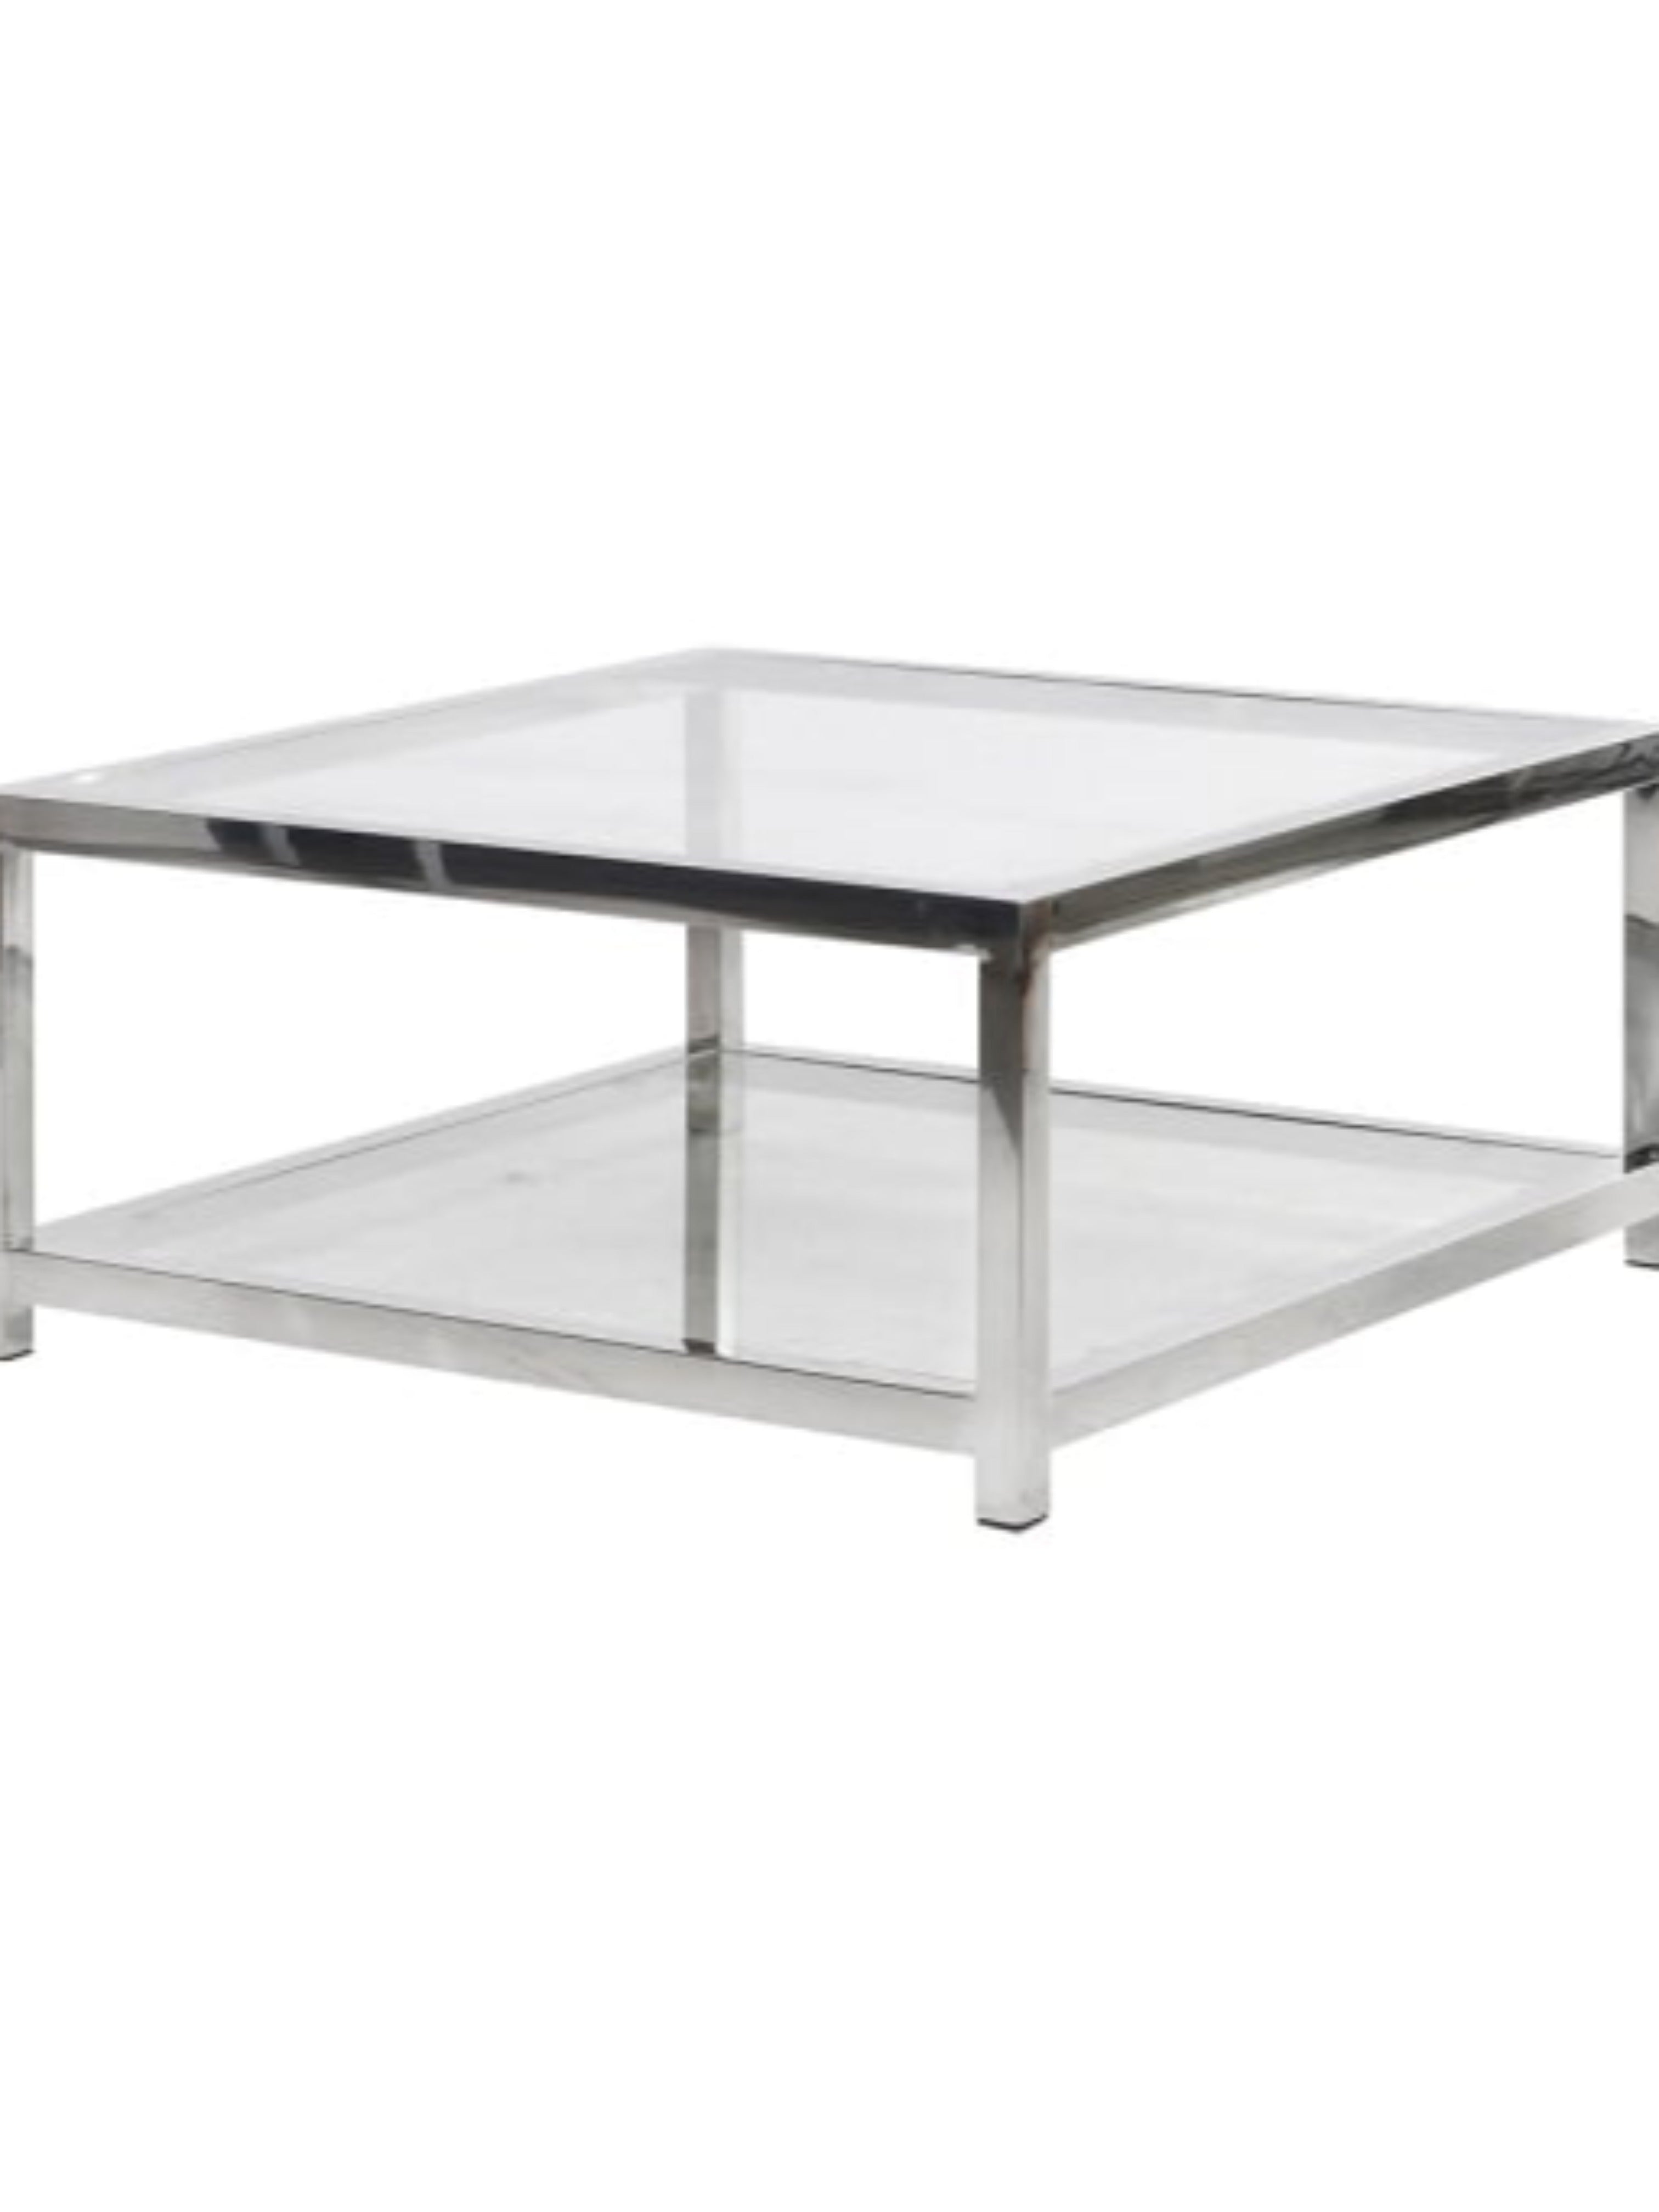 Two Tiered Glass and Steel Square Coffee Table